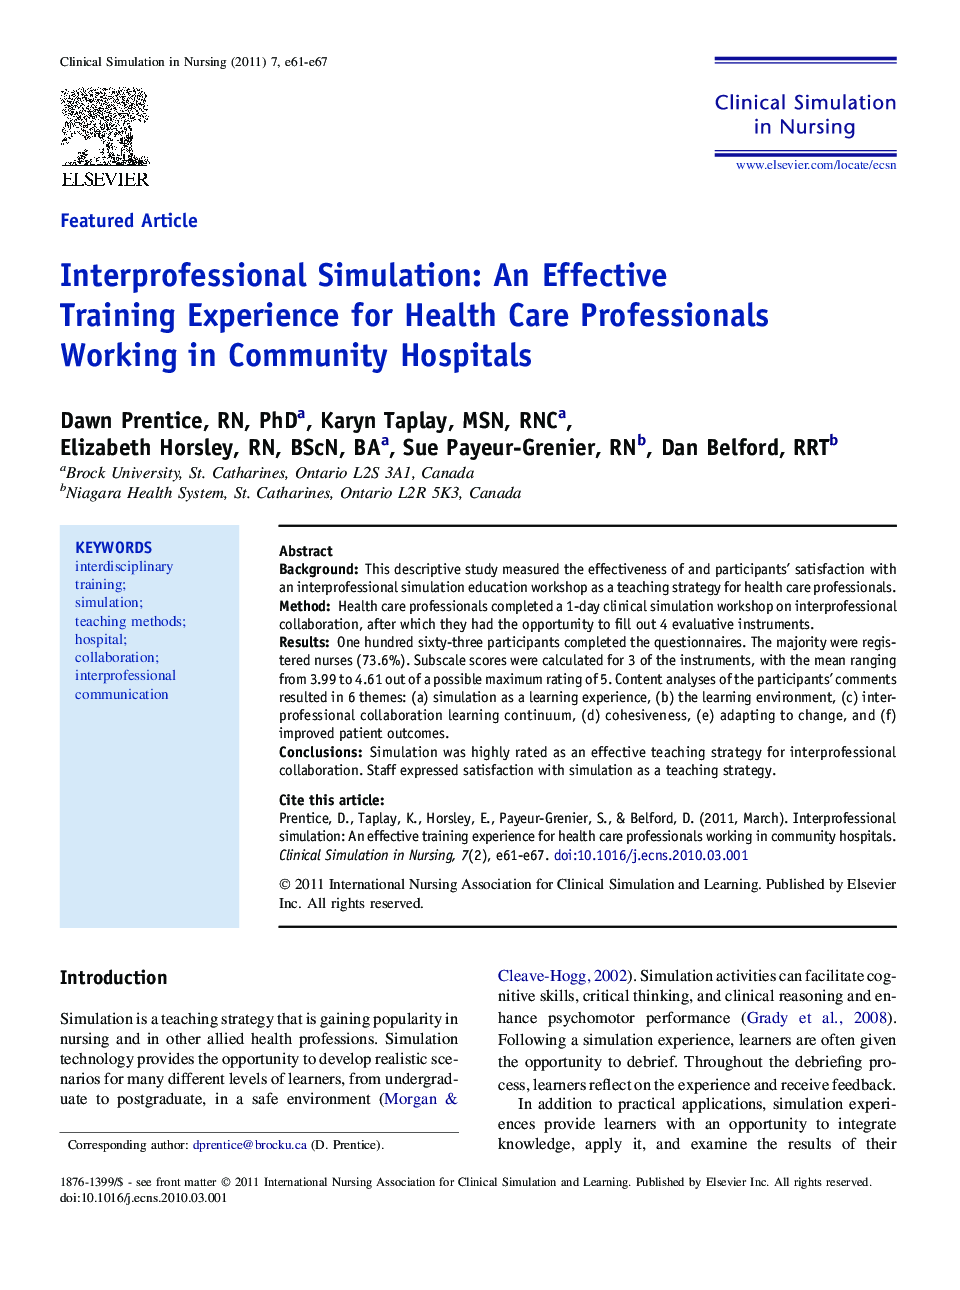 Interprofessional Simulation: An Effective Training Experience for Health Care Professionals Working in Community Hospitals 